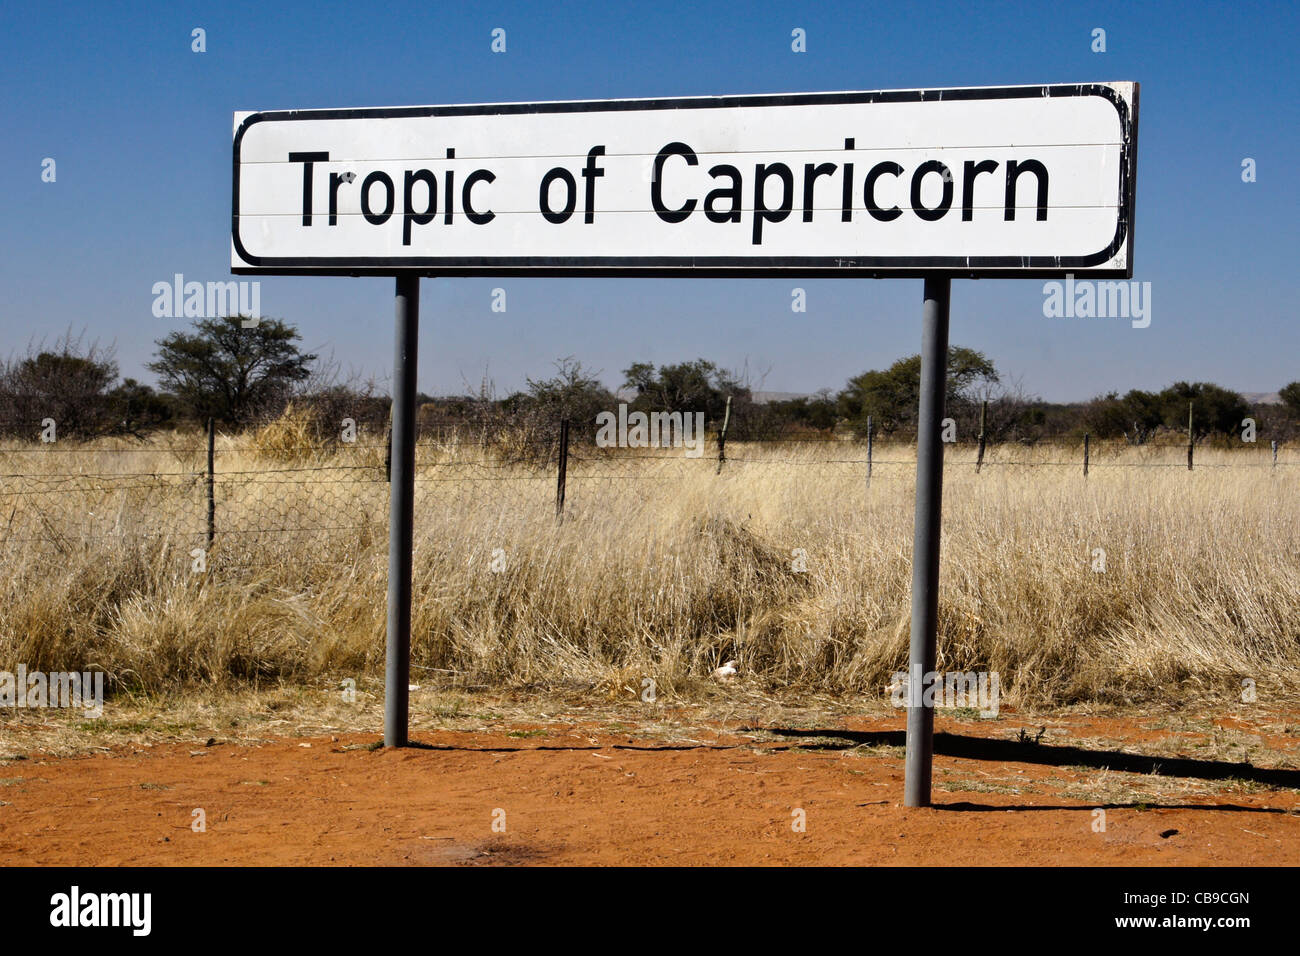 Tropic of Capricorn sign in Namibia Stock Photo